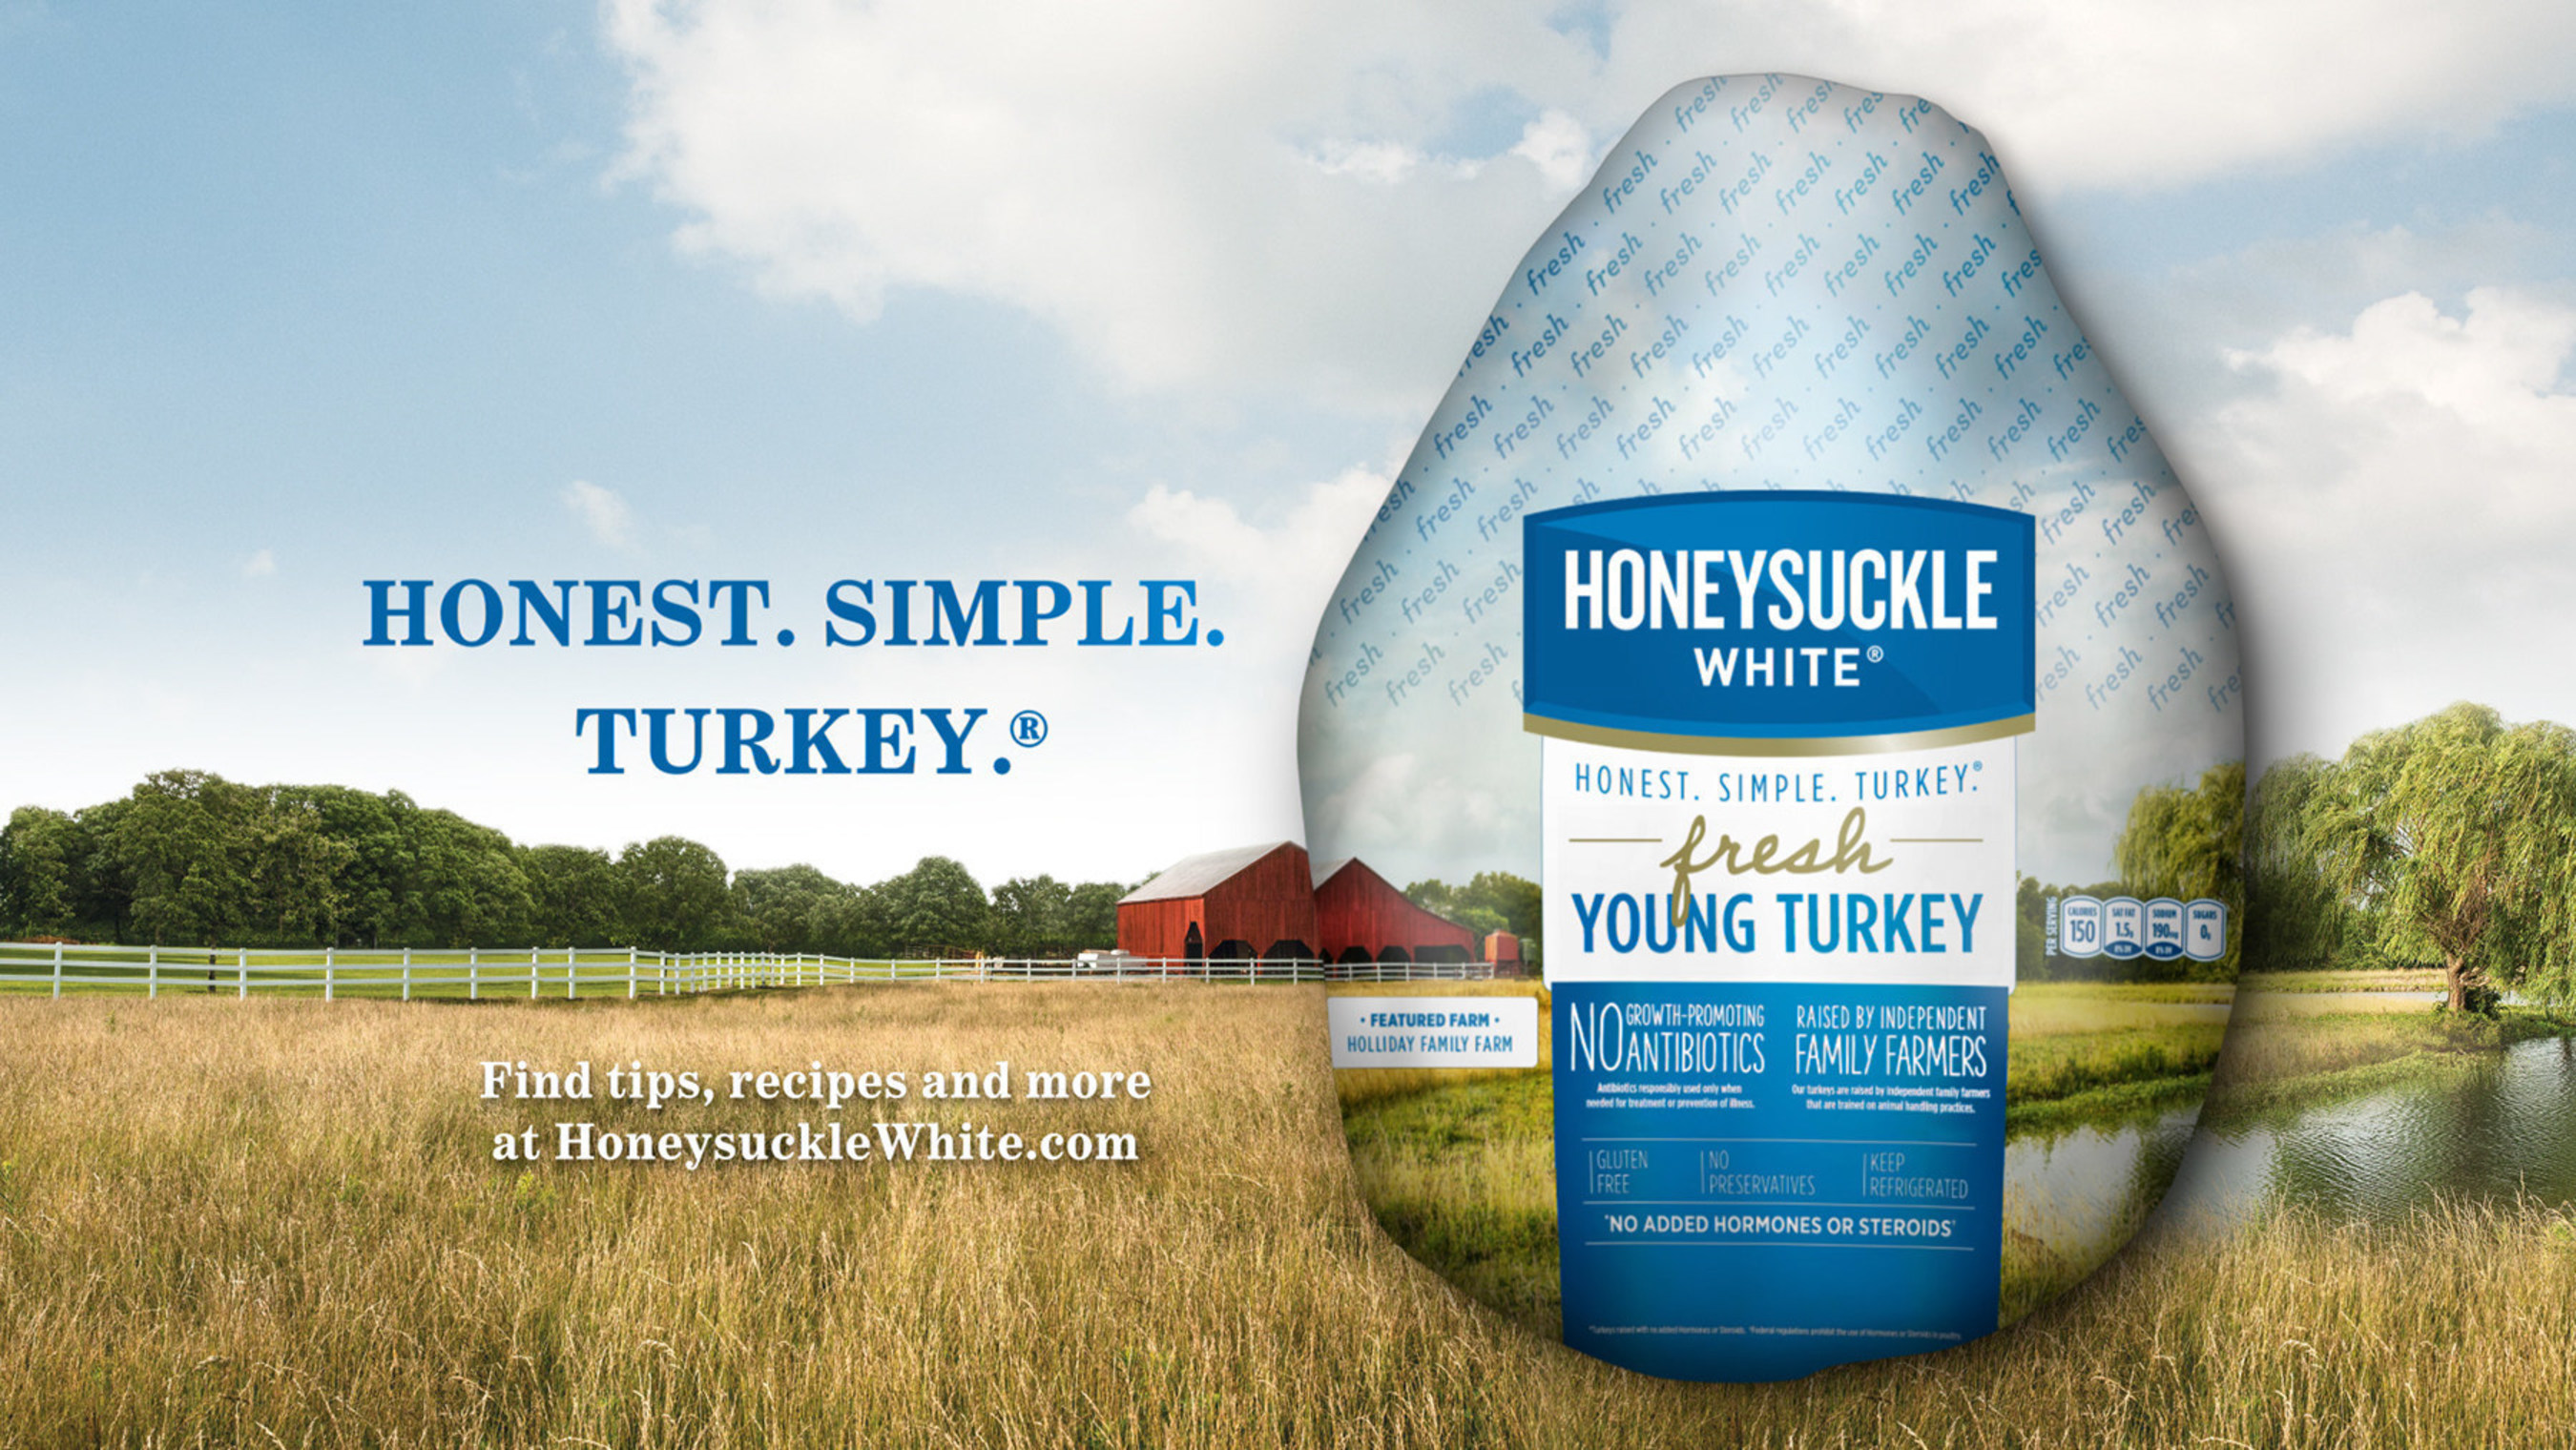 Honeysuckle White, Shady Brook Farms, debut holiday season ad campaign with Honest. Simple. Turkey. (R) theme